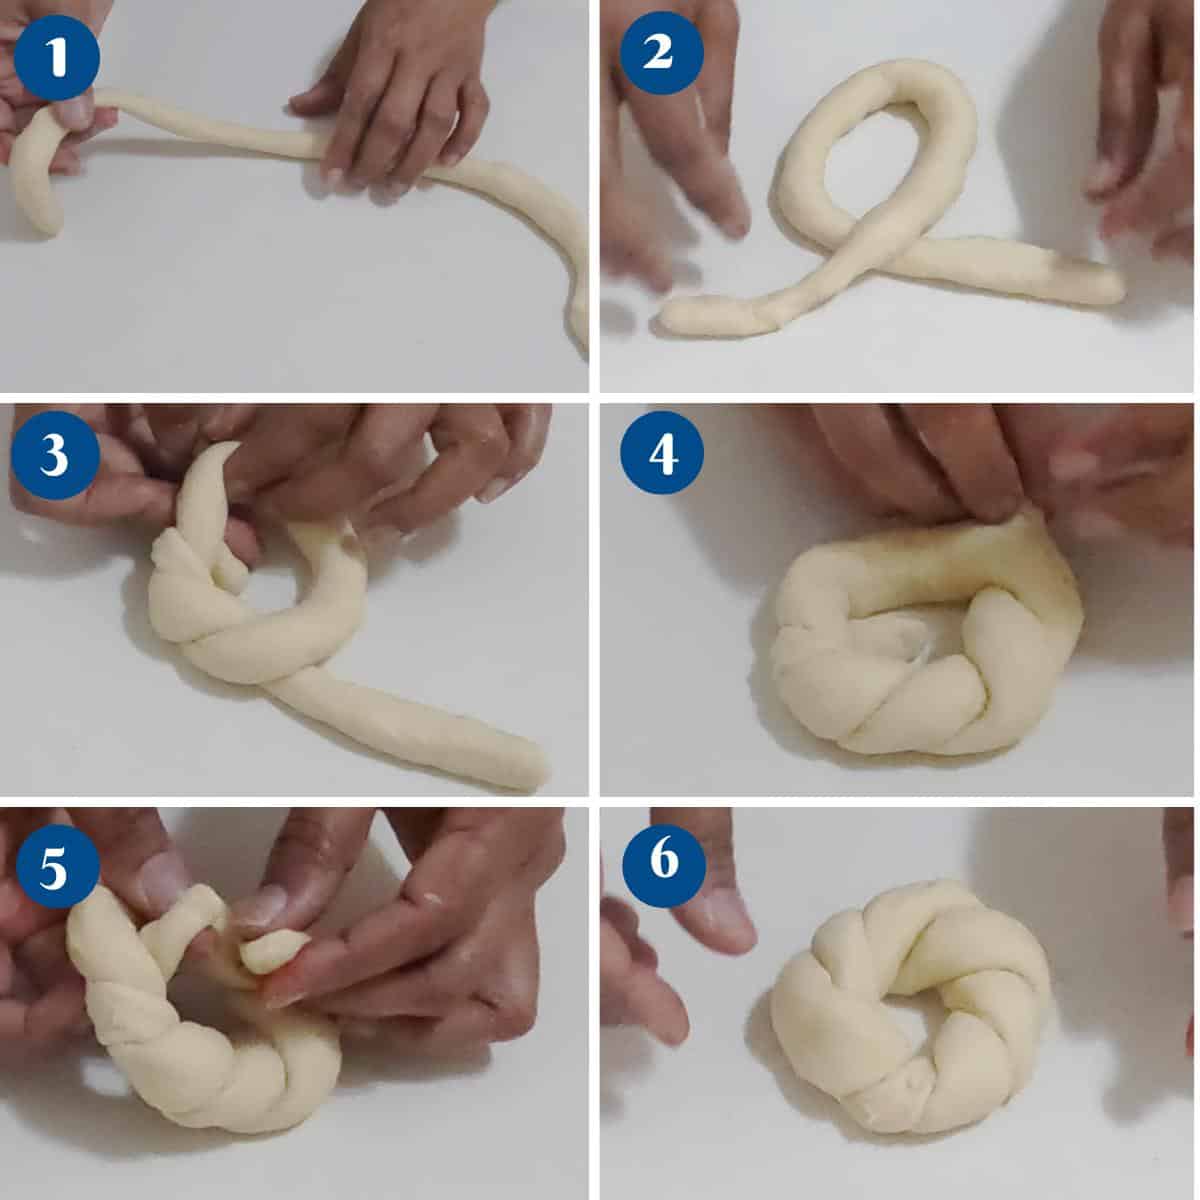 Progress pictures how to shape the eater egg bread.